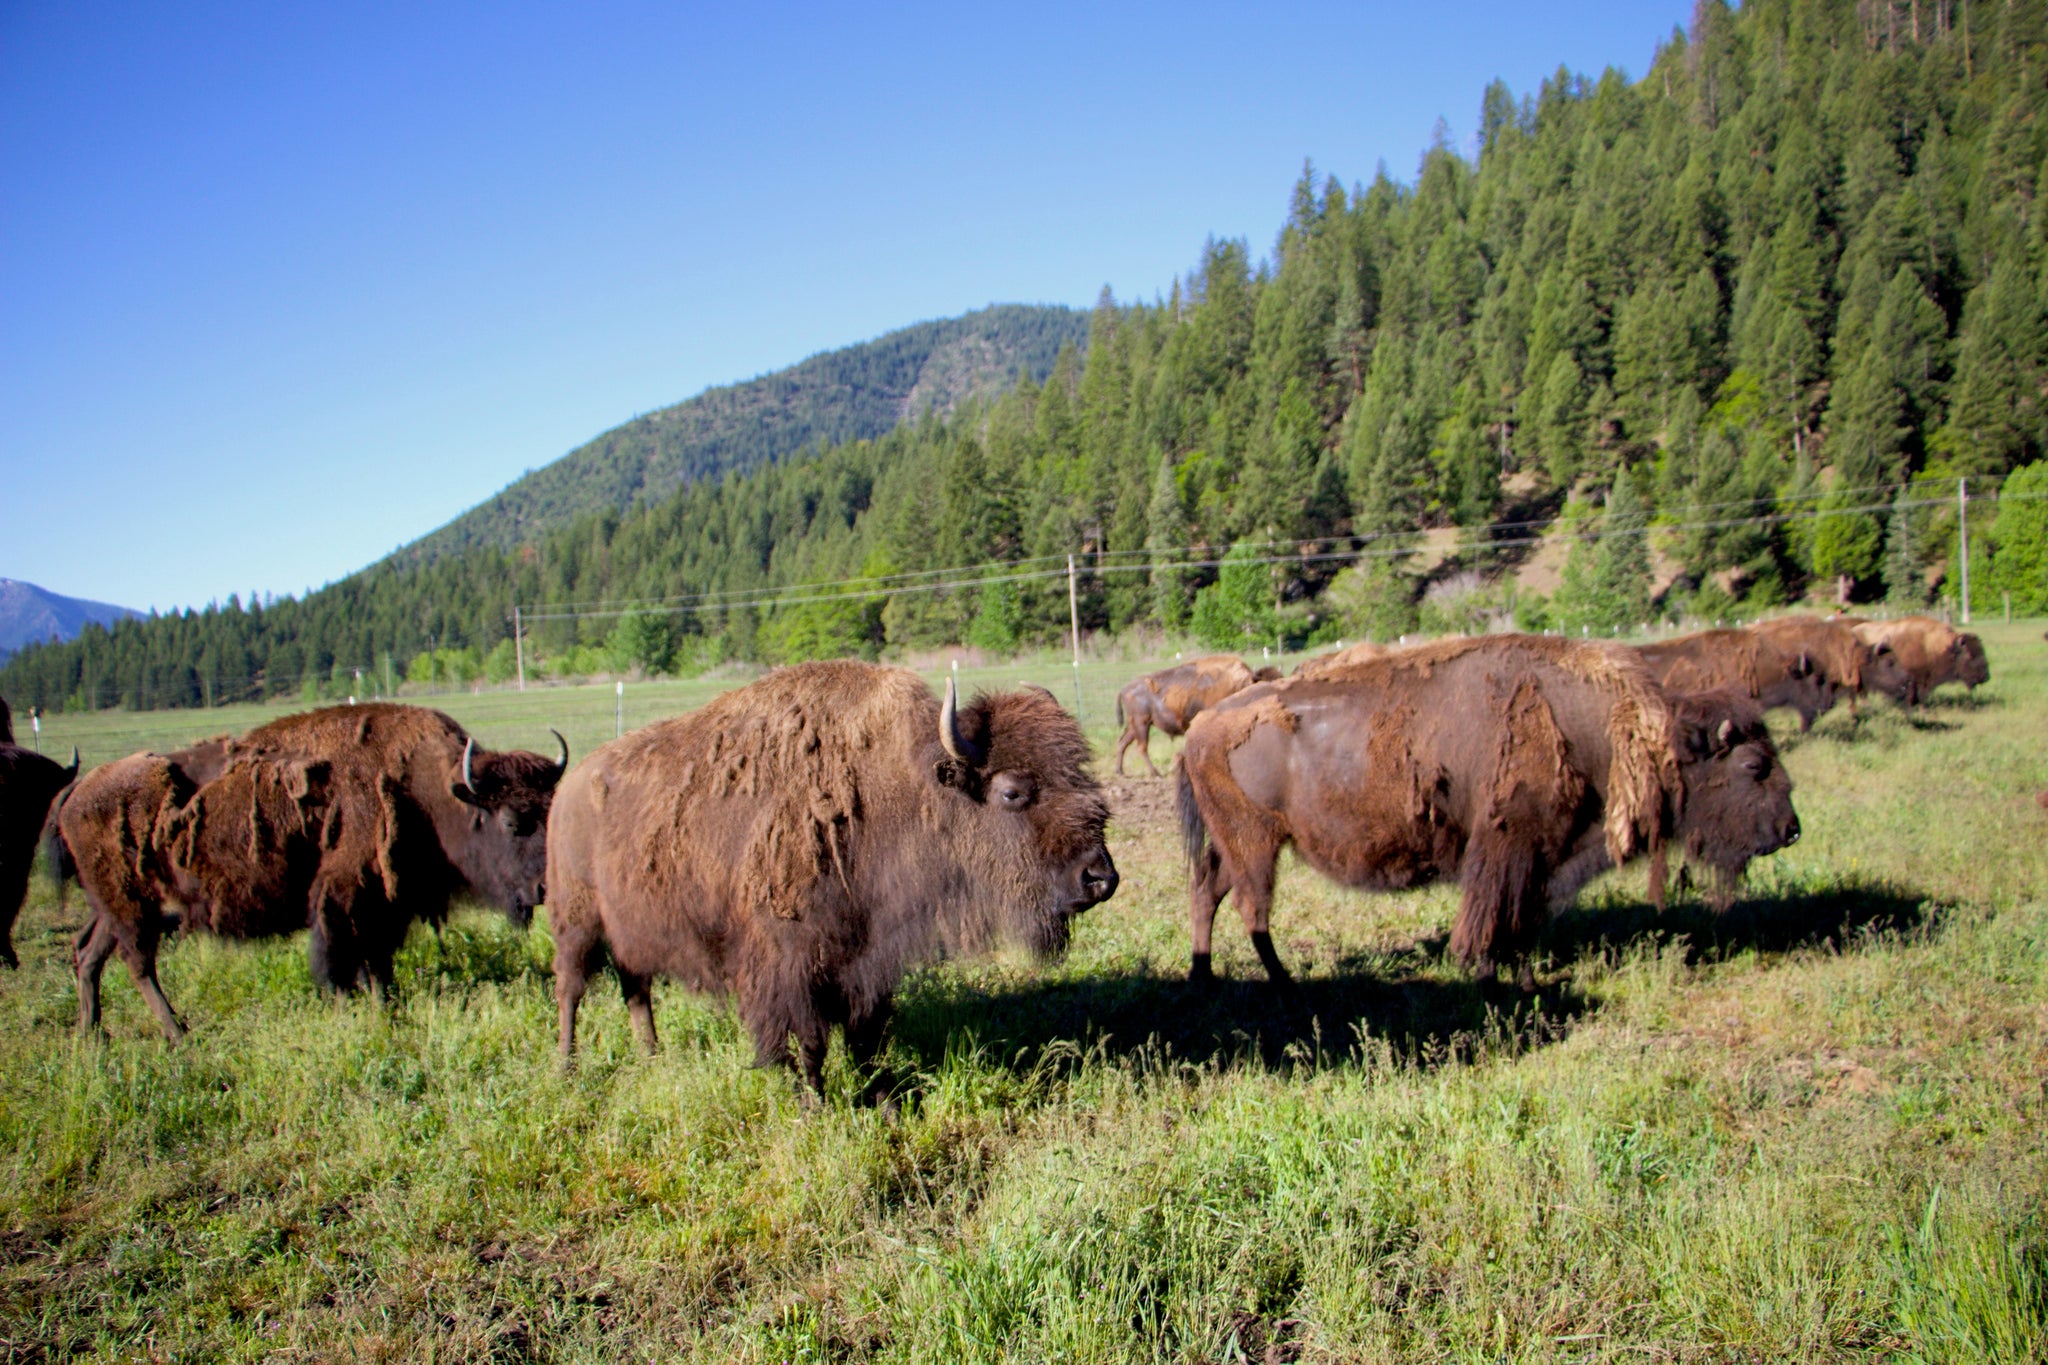 Thunder of the Plains:  The American Bison